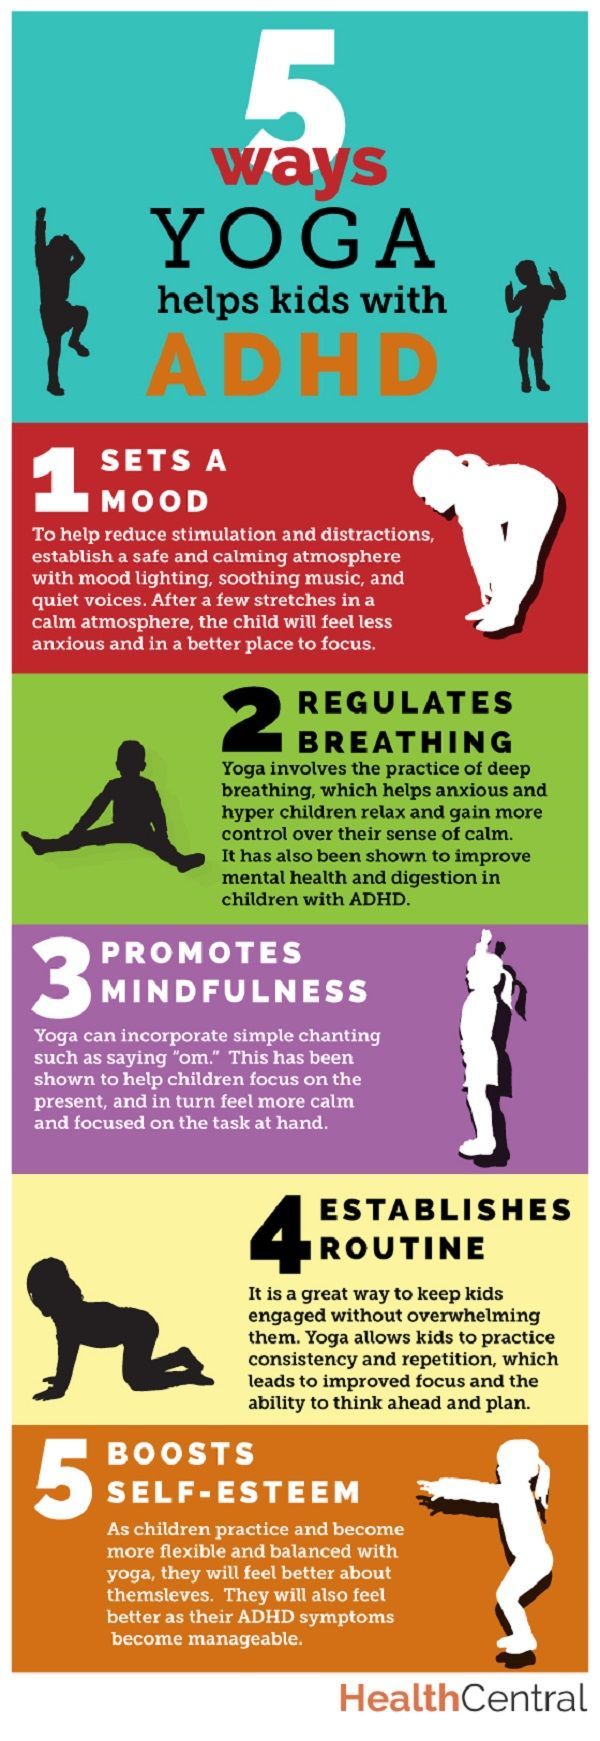 5 ways #yoga is good for kids with #ADHD www.healthcentral...